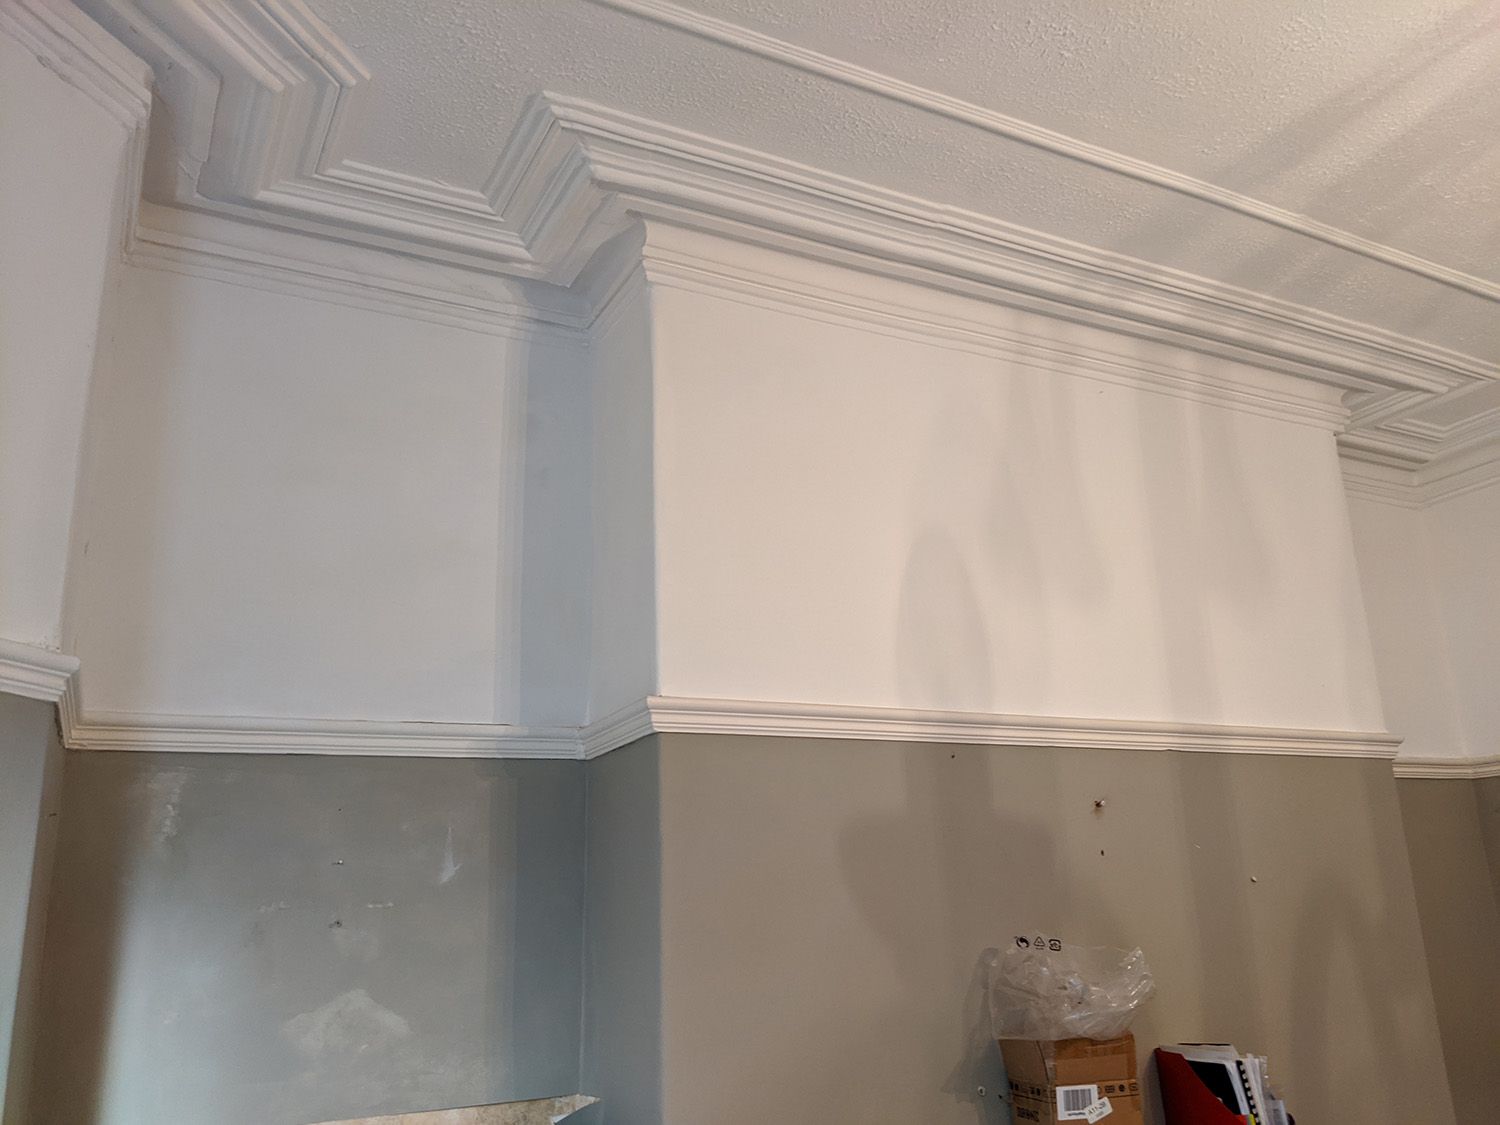 The area above the mantlepiece where the ceiling light would go before work started.